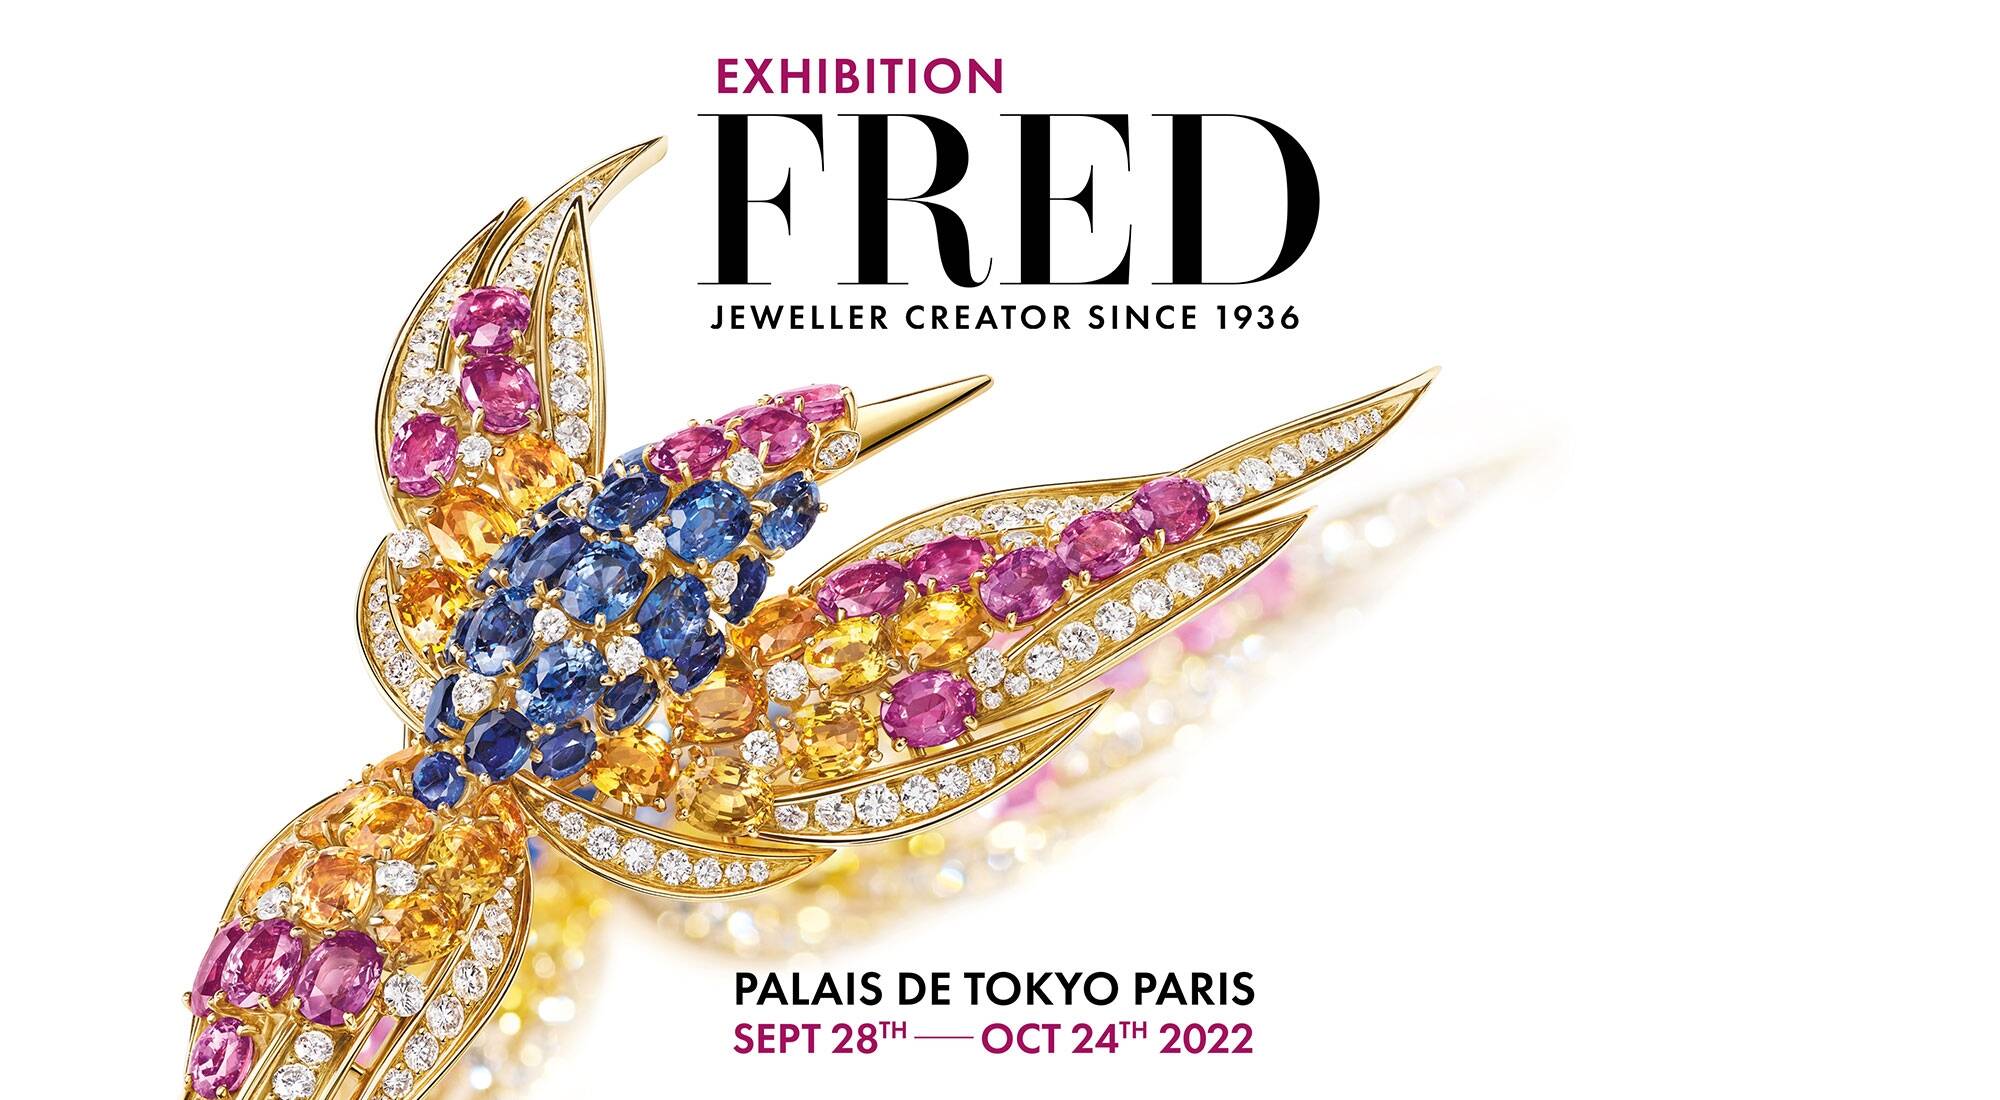 FRED, Jeweler Creator Since 1936”, Maison FRED presents first-ever